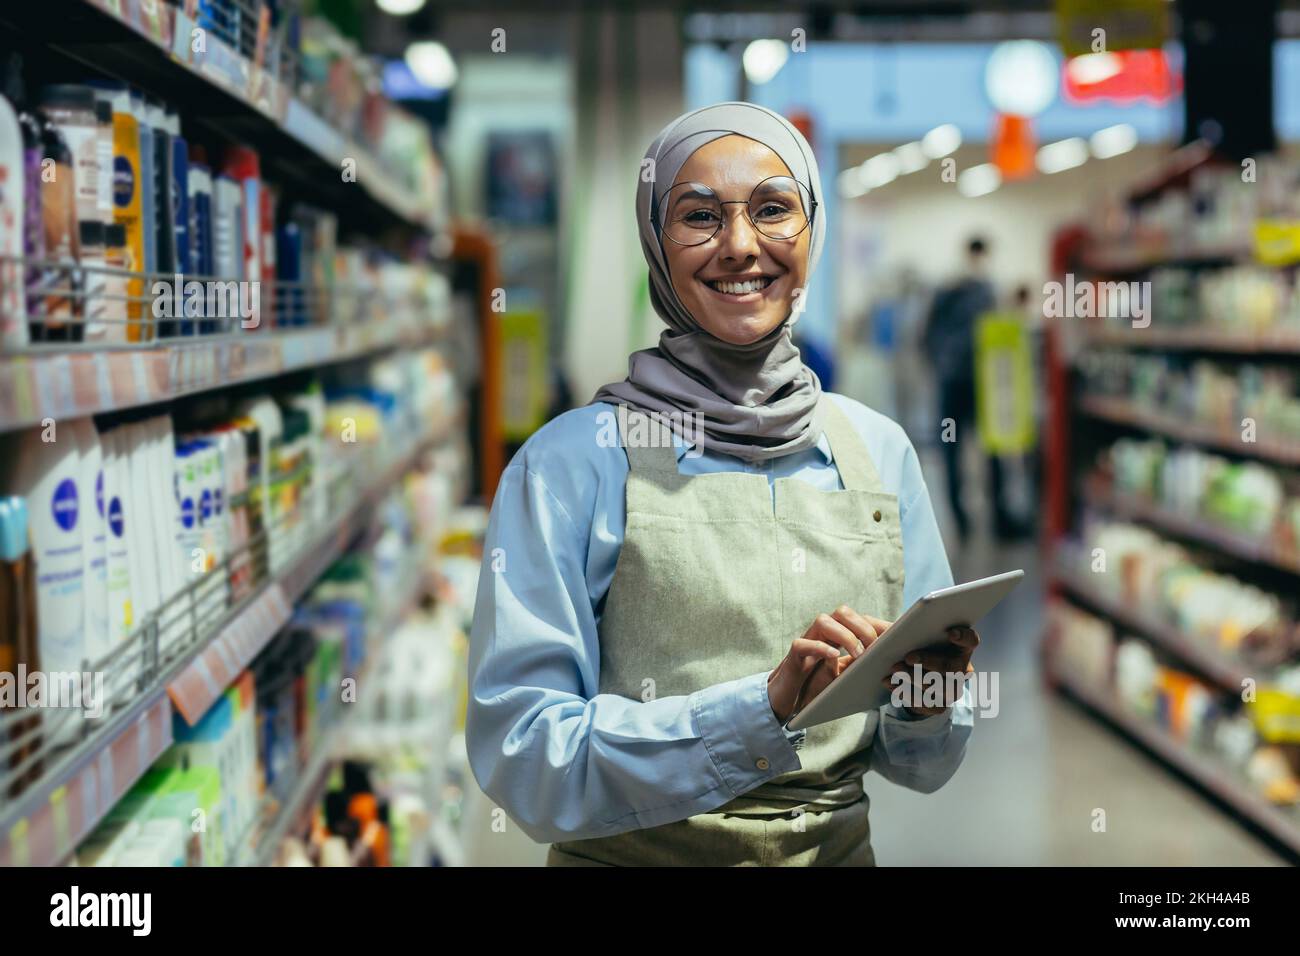 Portrait of a woman in a hijab, a shop worker in a supermarket with a tablet computer, looks at the camera and smiles, a female seller consultant in glasses among rows of shelves with goods. Stock Photo